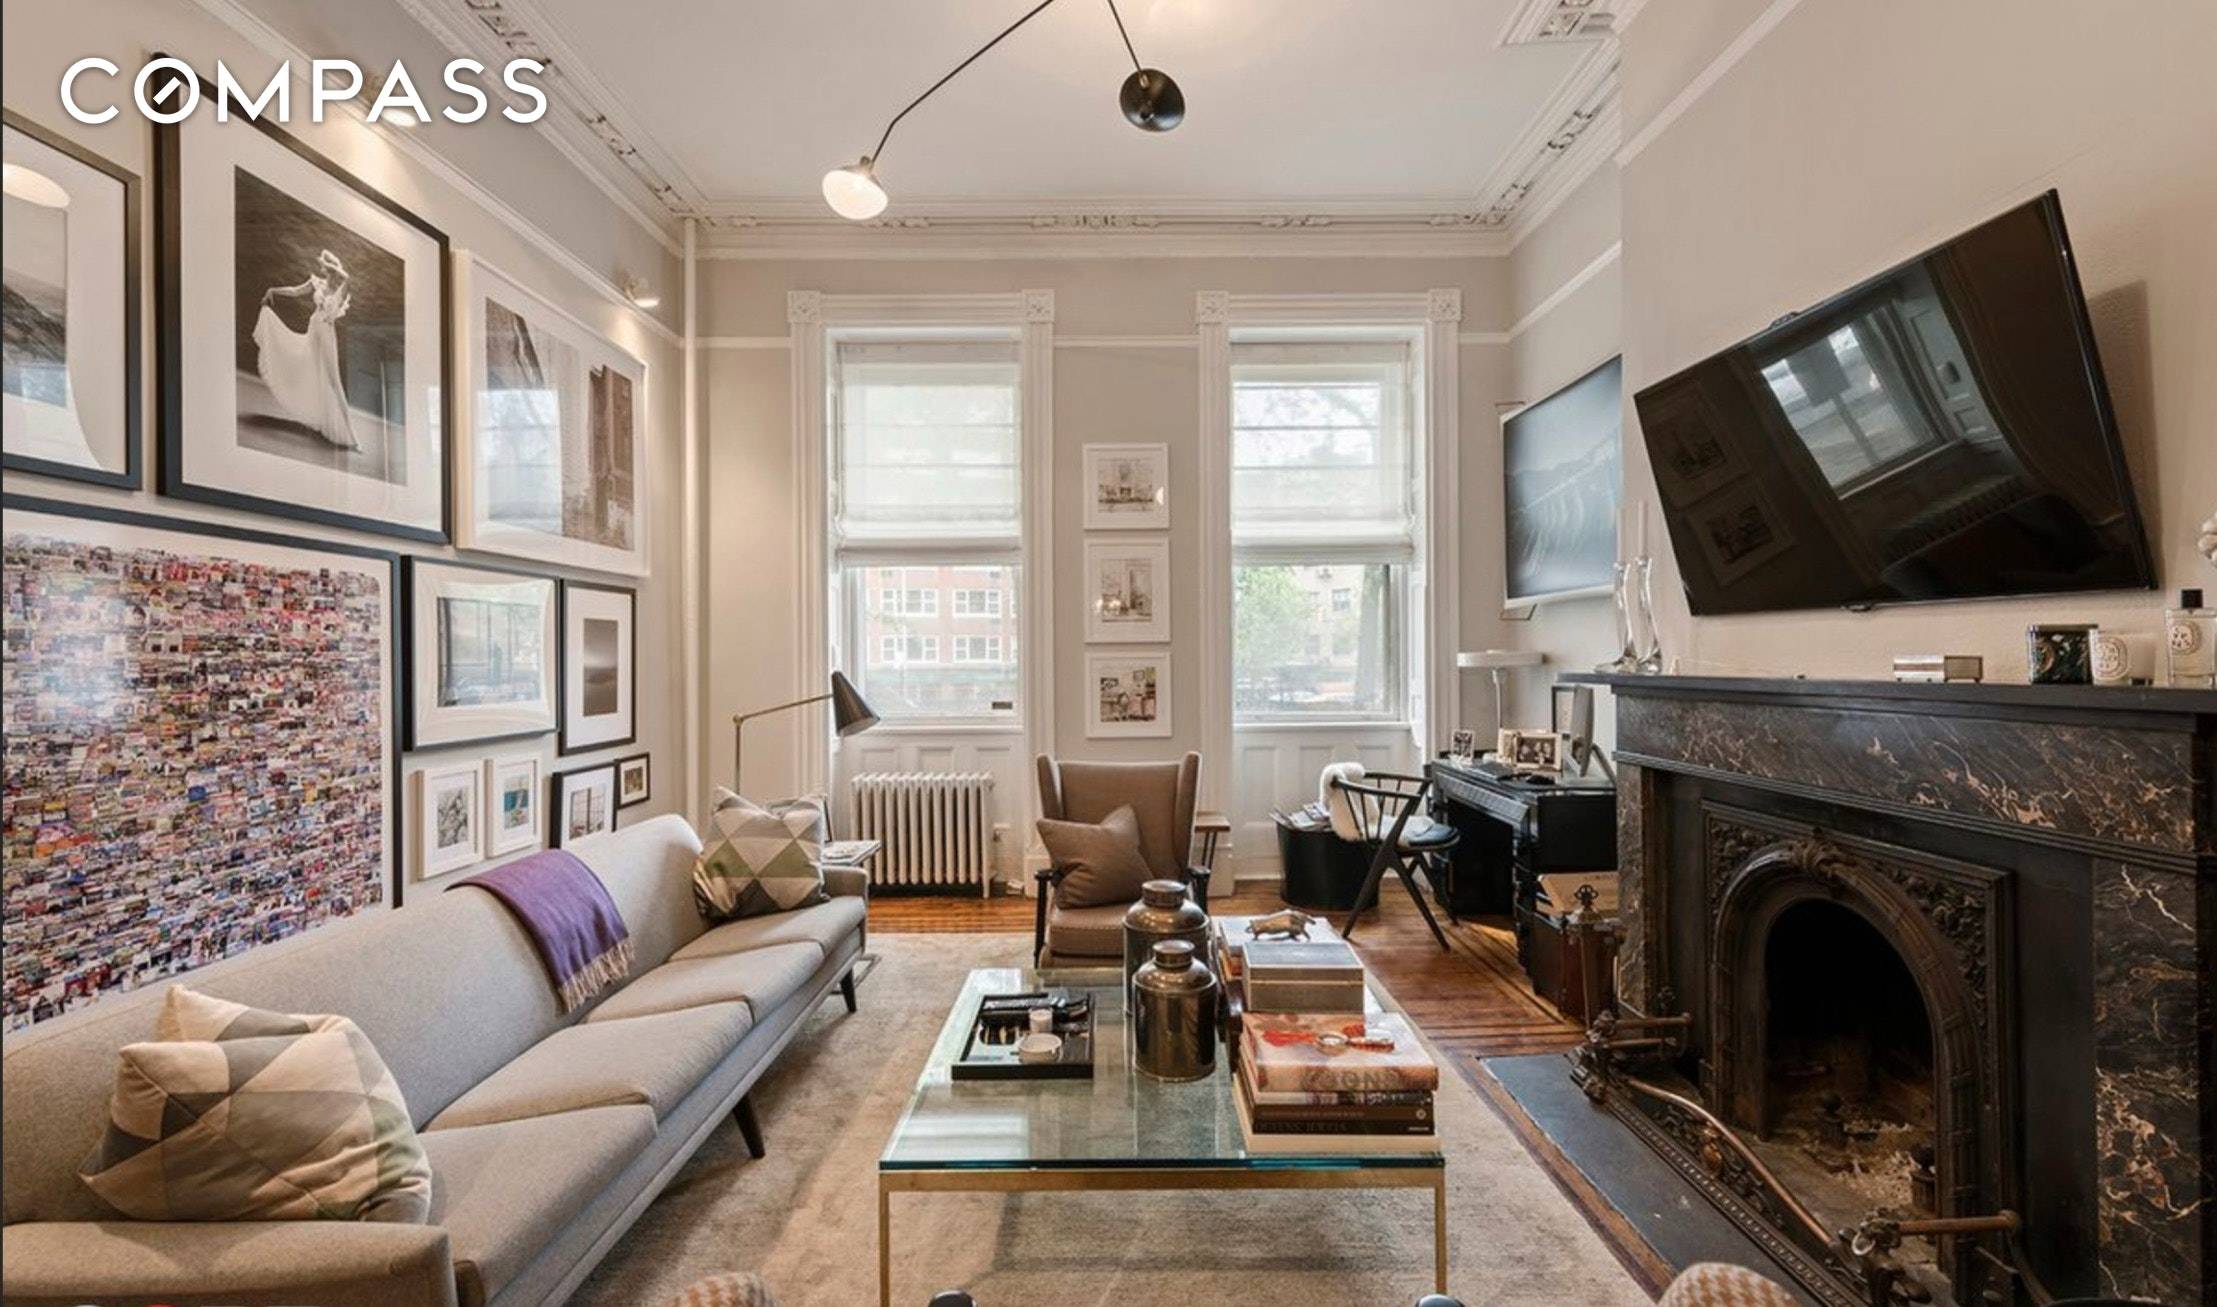 This charming, light filled, one bedroom Parlor Floor residence in a circa 1900 twenty foot wide townhouse is conveniently located in SoHo off of 6th Avenue and Prince Street.